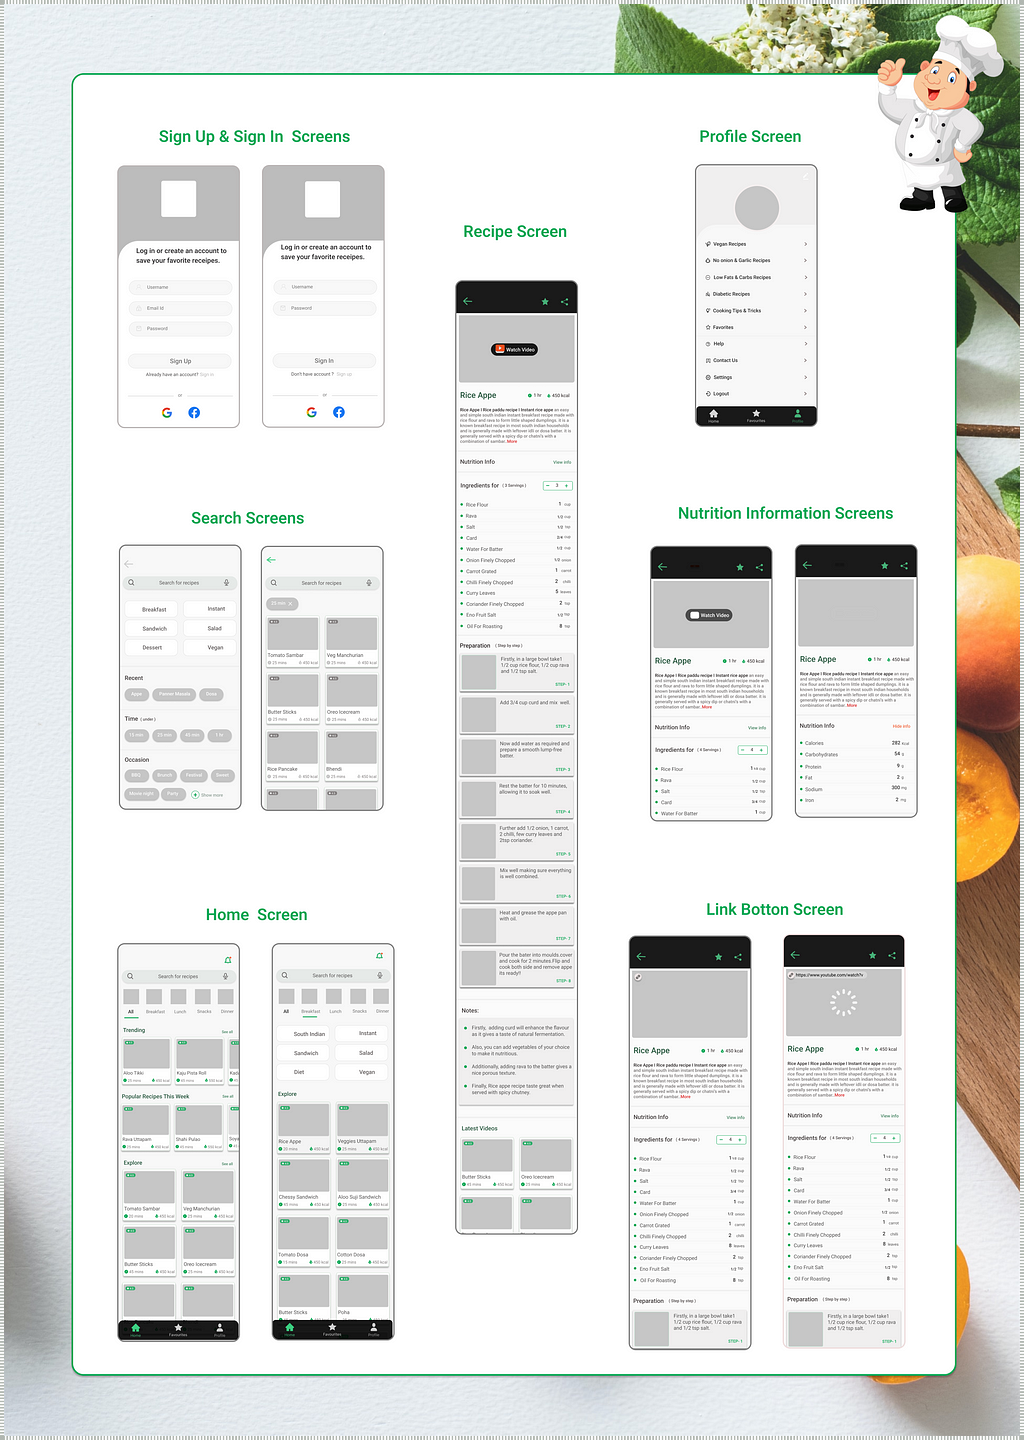 This image is of the Hi-fi wireframes of the redesigned app.